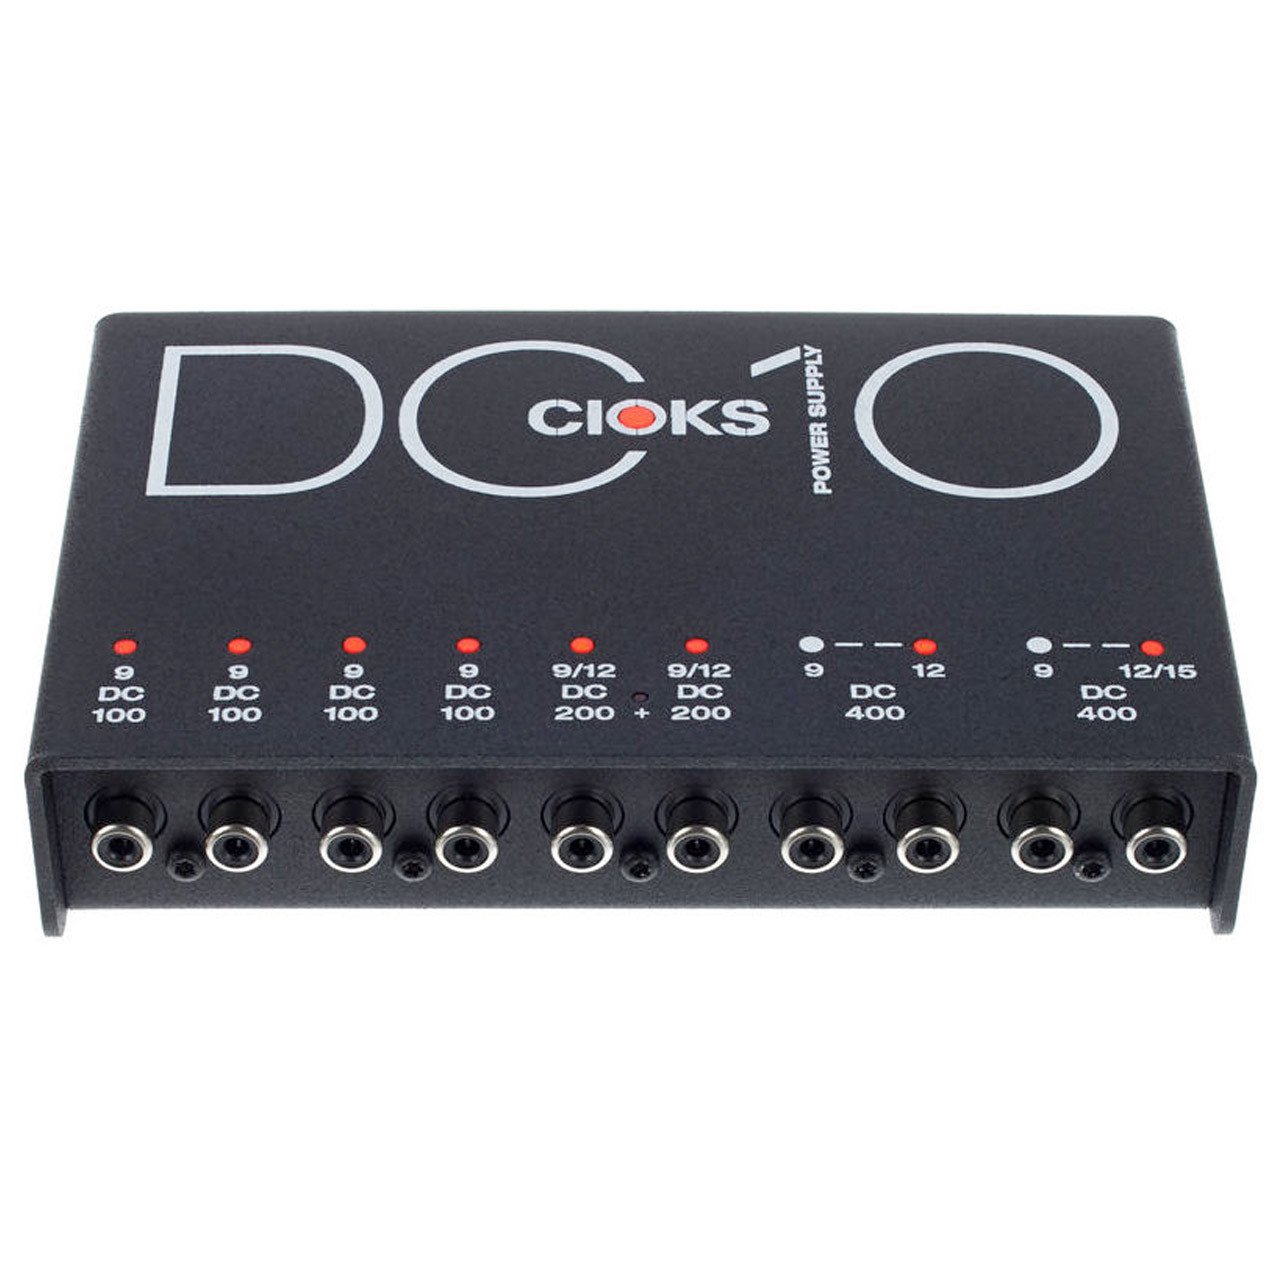 Power Supplies - CIOKS DC10 - Professional Power Supply For Effect Pedals With 10 Outlets